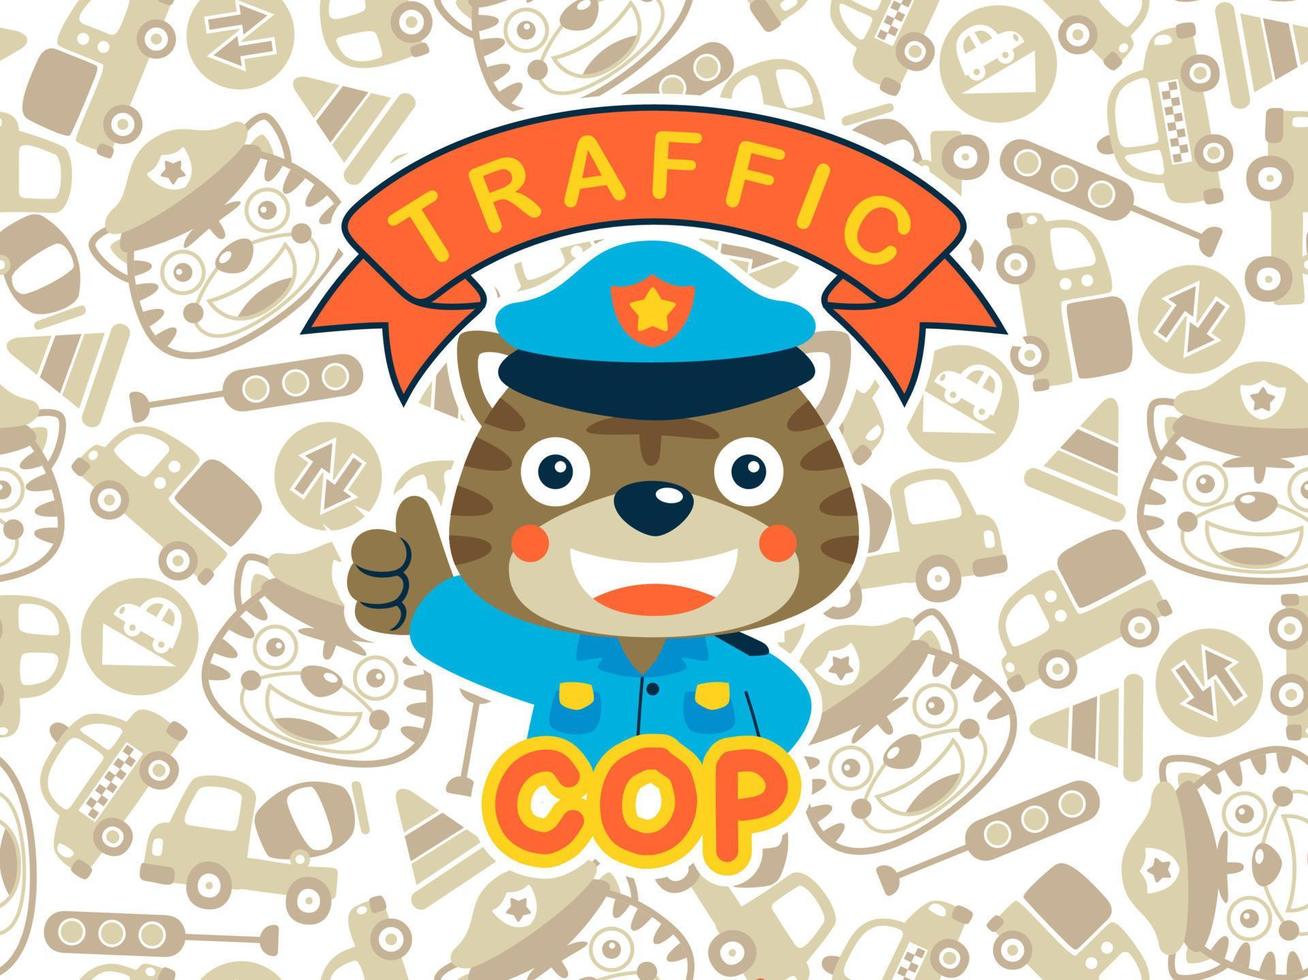 Cute tiger in traffic cop  costume on seamless pattern background, including cars, traffic sign, tiger head vector